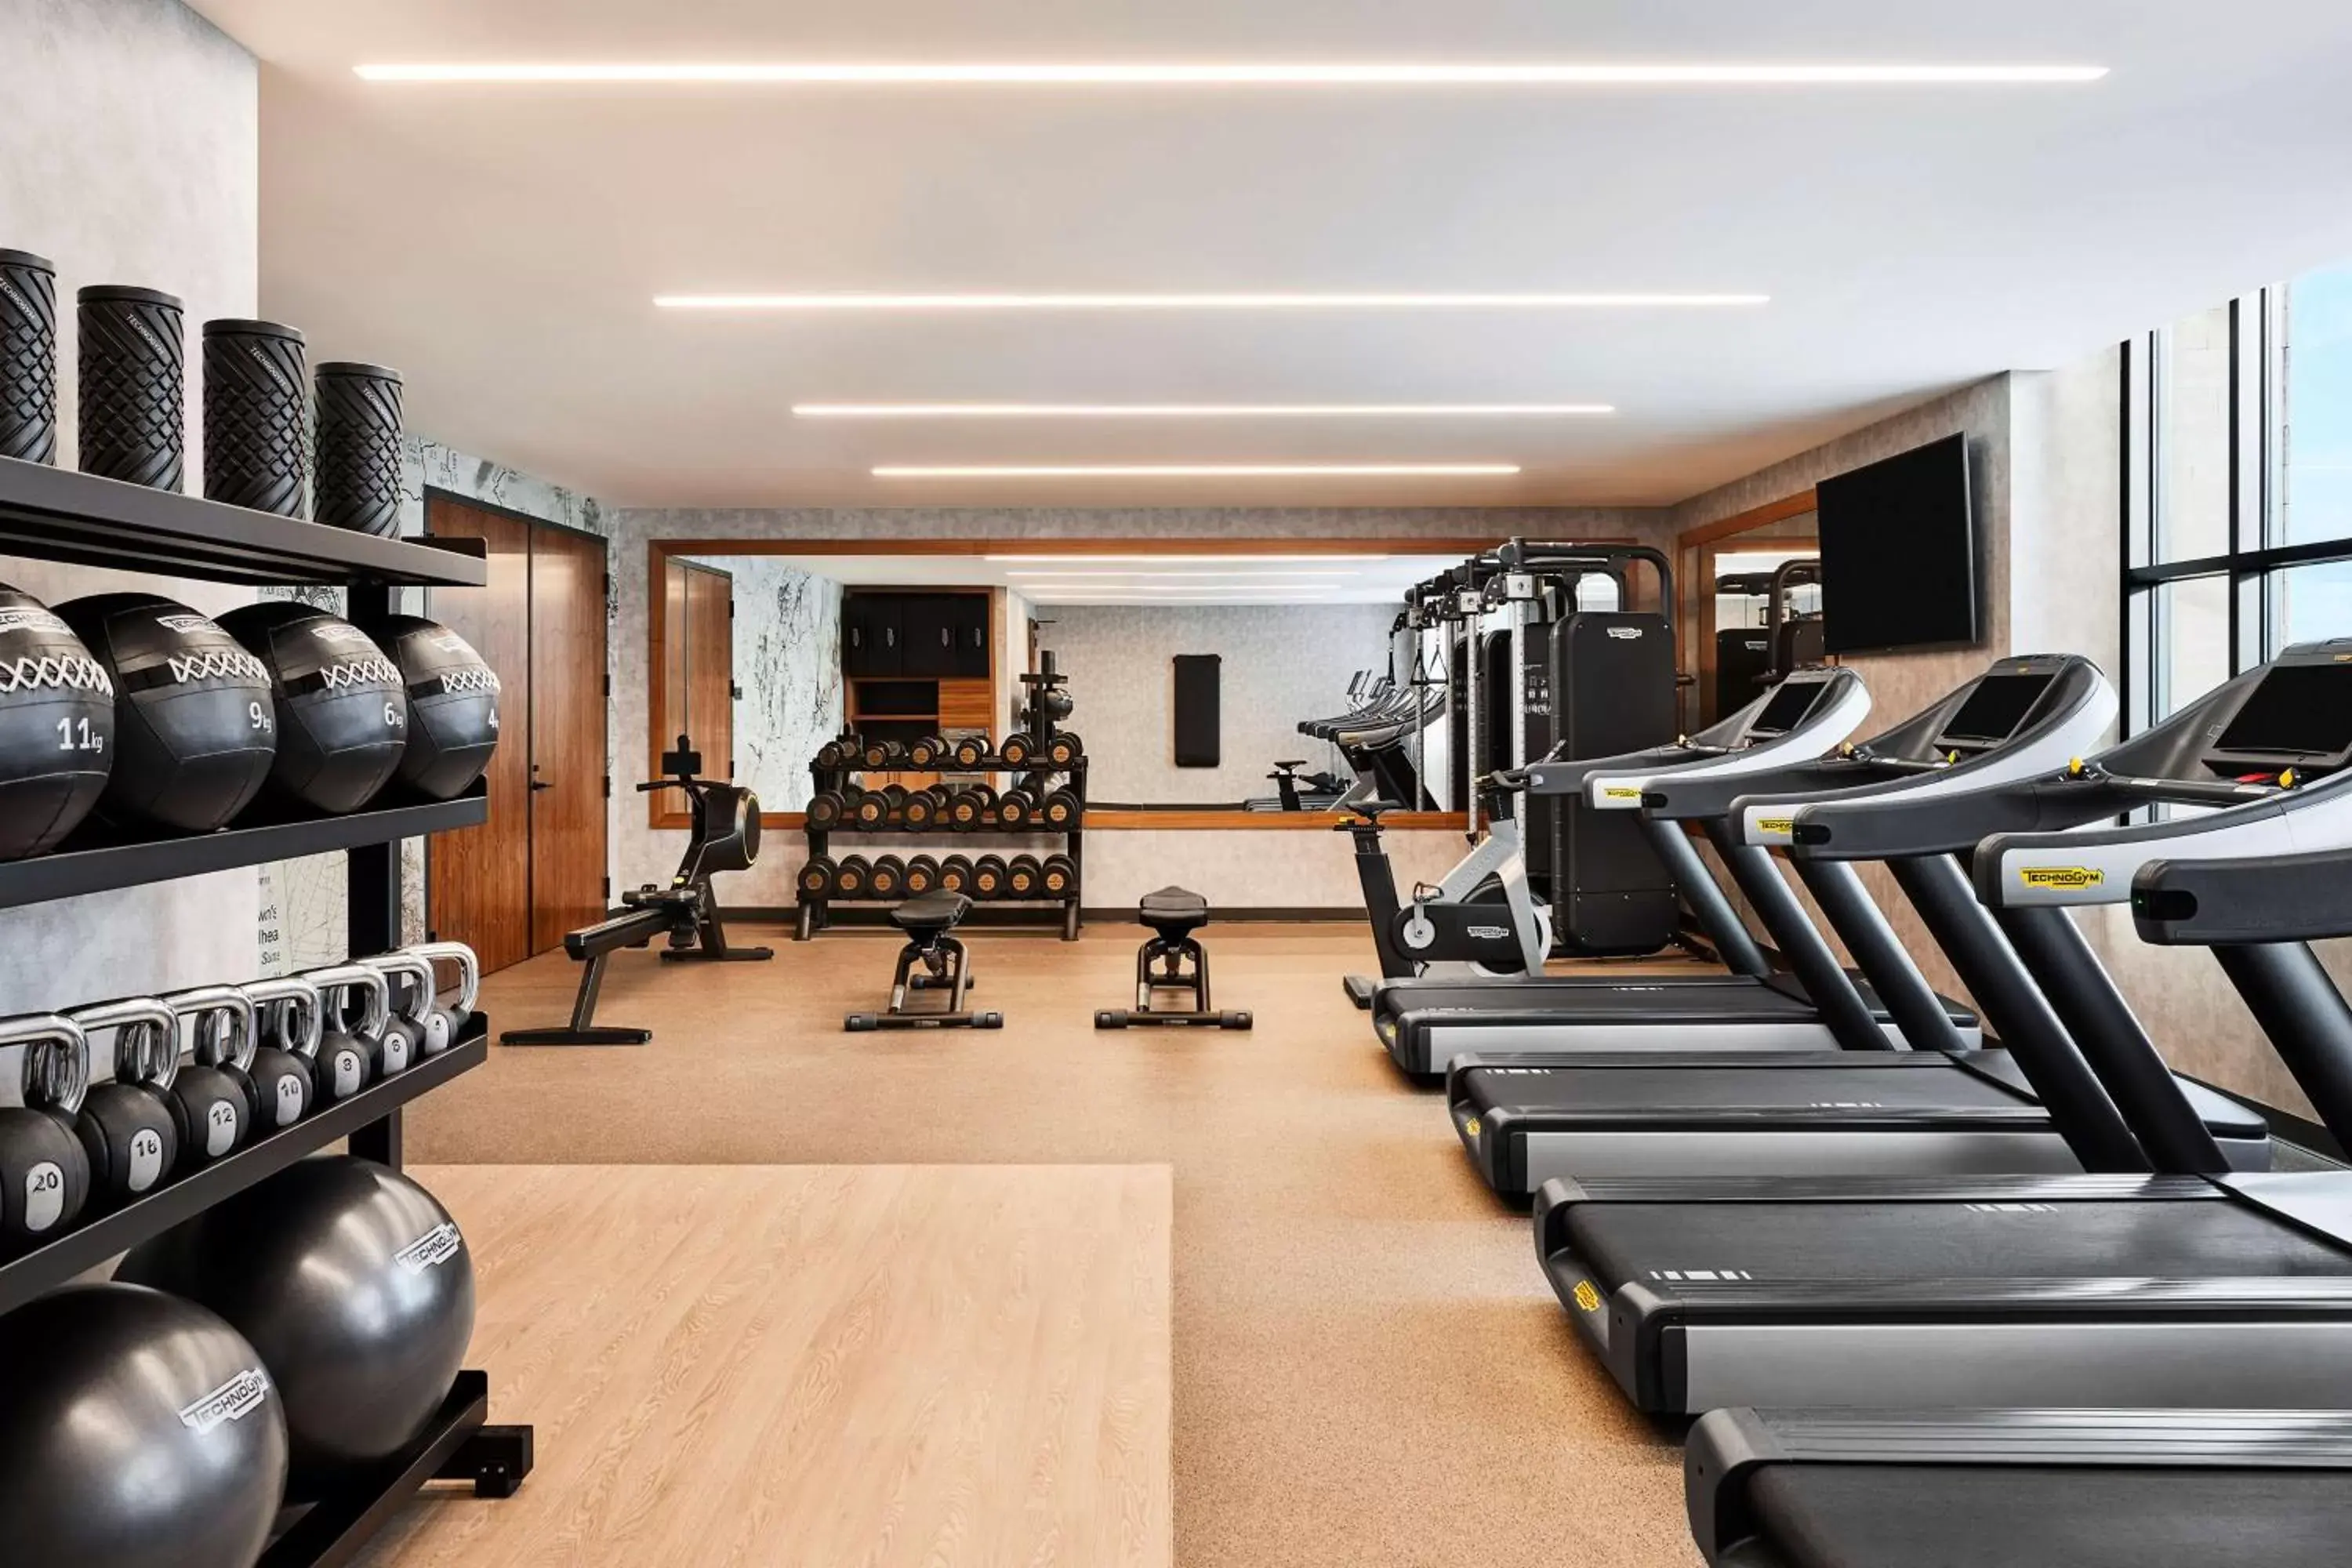 Fitness centre/facilities, Fitness Center/Facilities in Canopy By Hilton Scottsdale Old Town